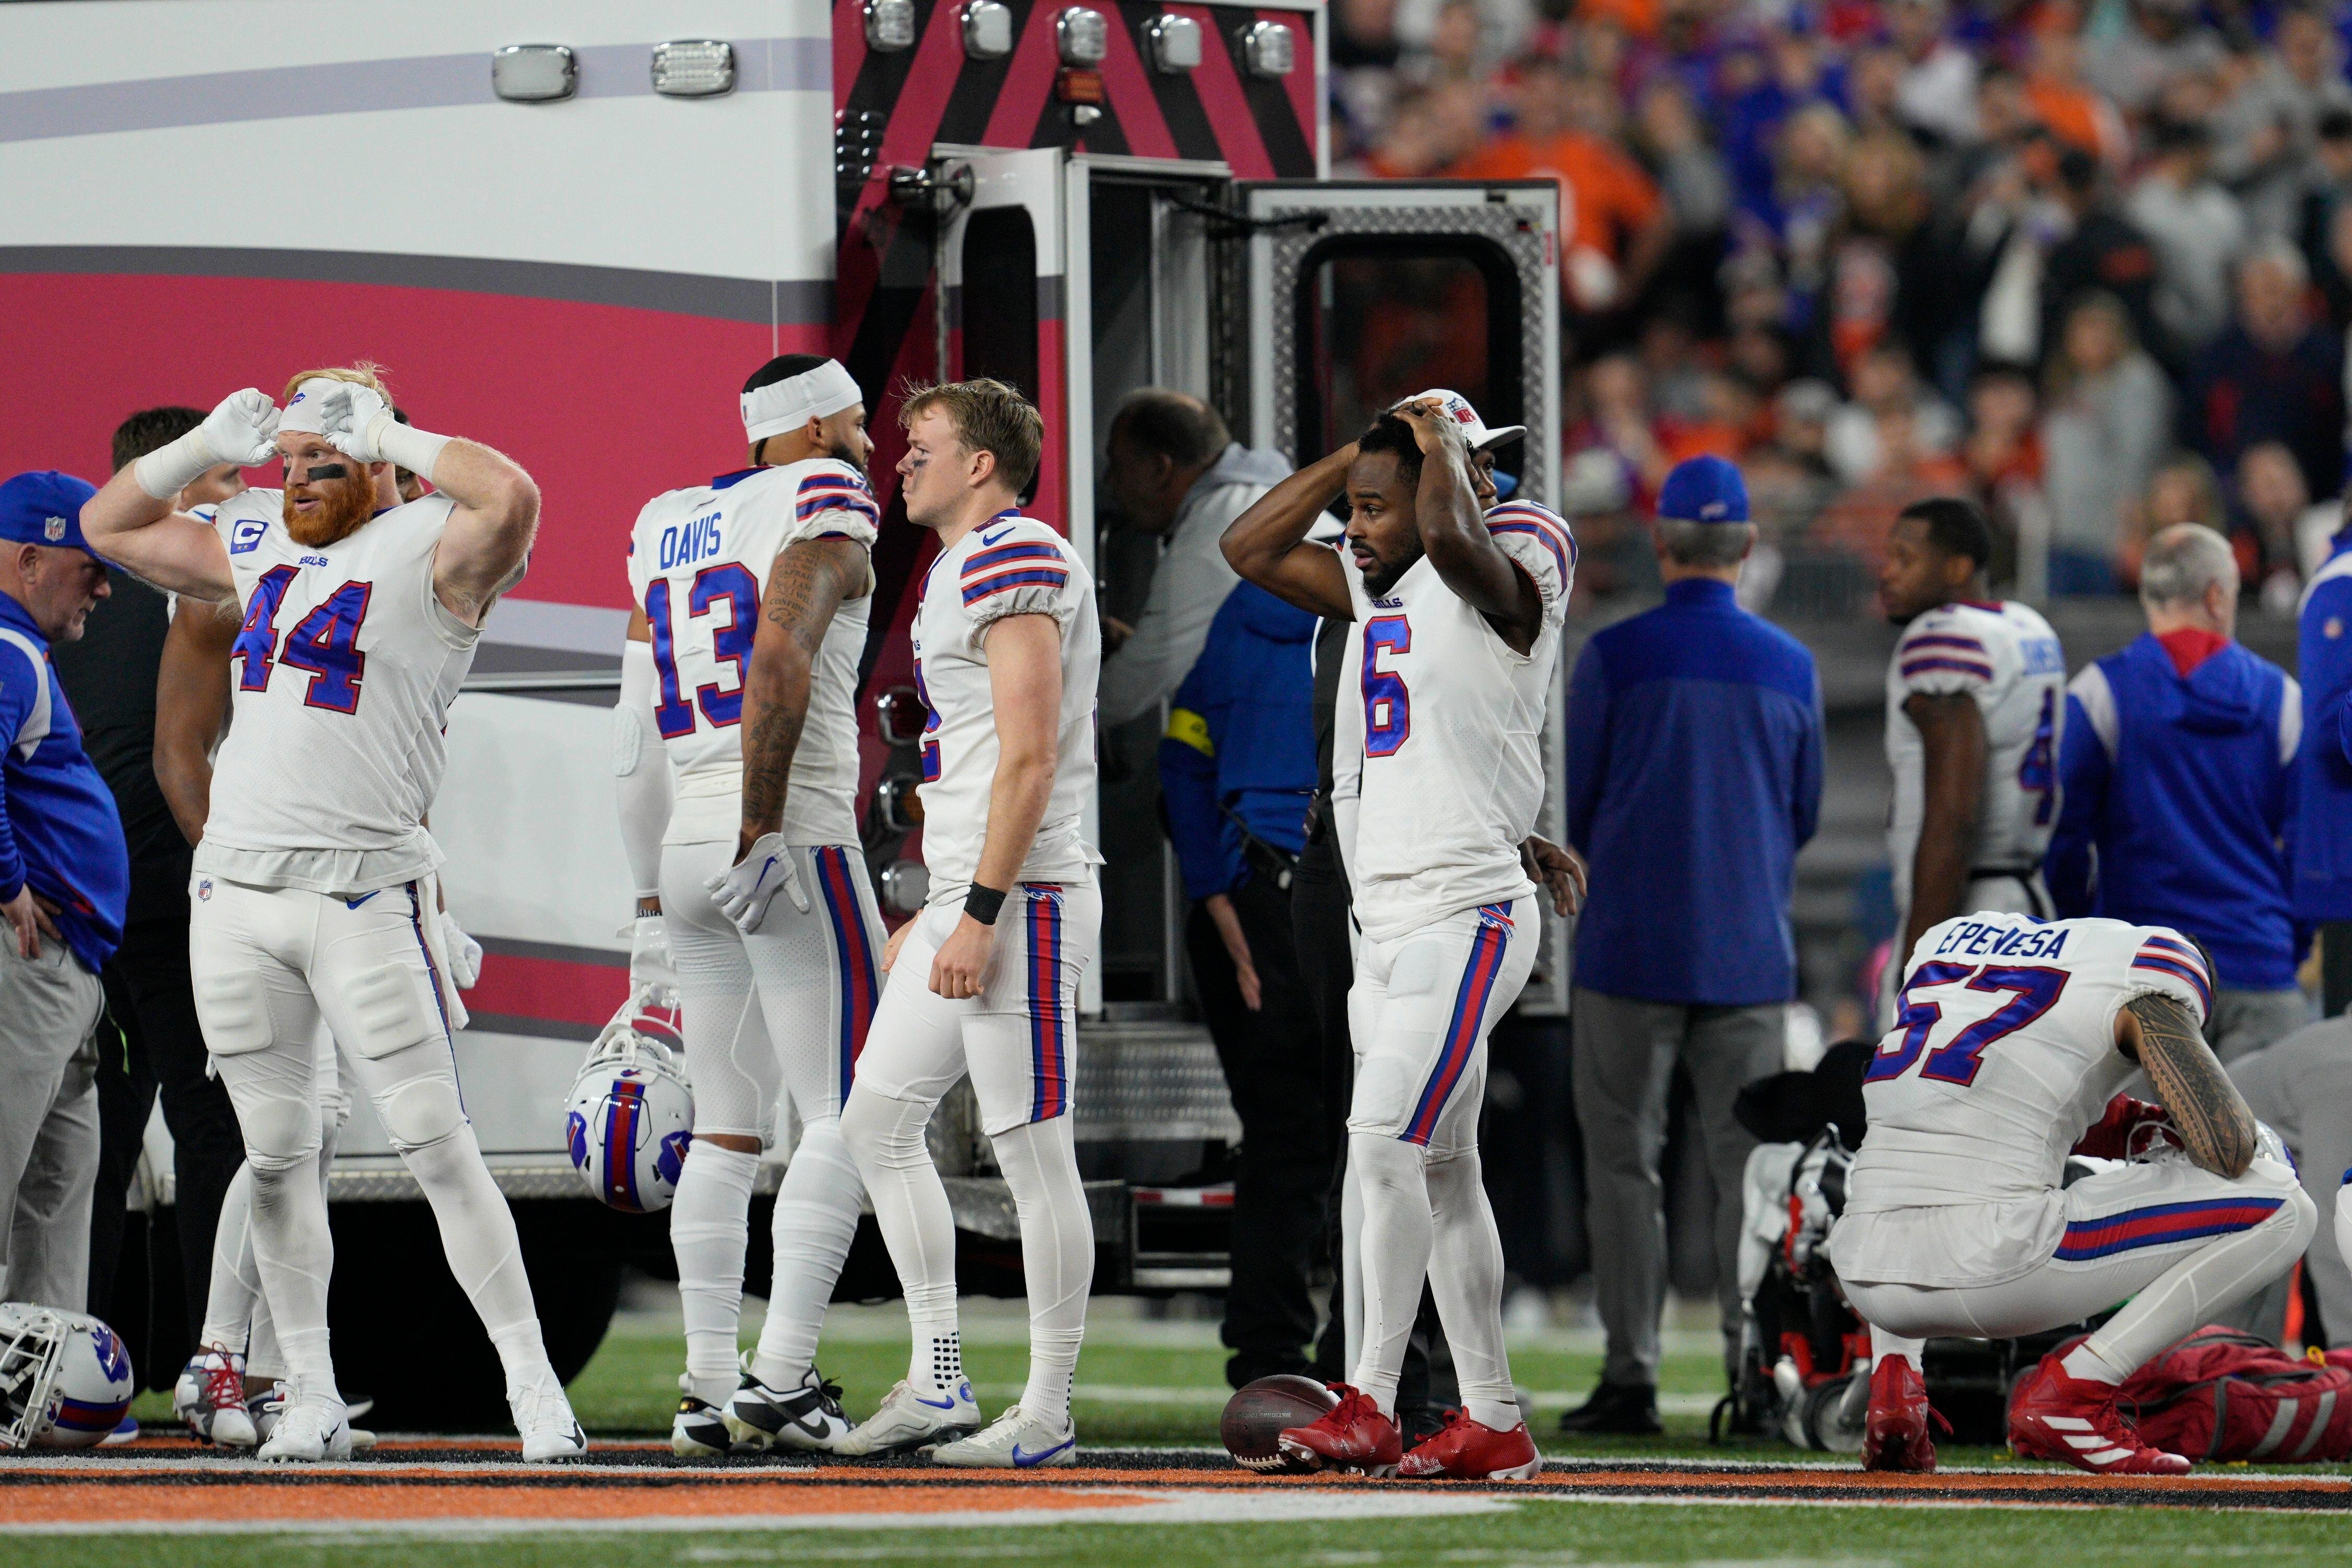 Suspended game between Bills and Bengals won't be resumed, NFL